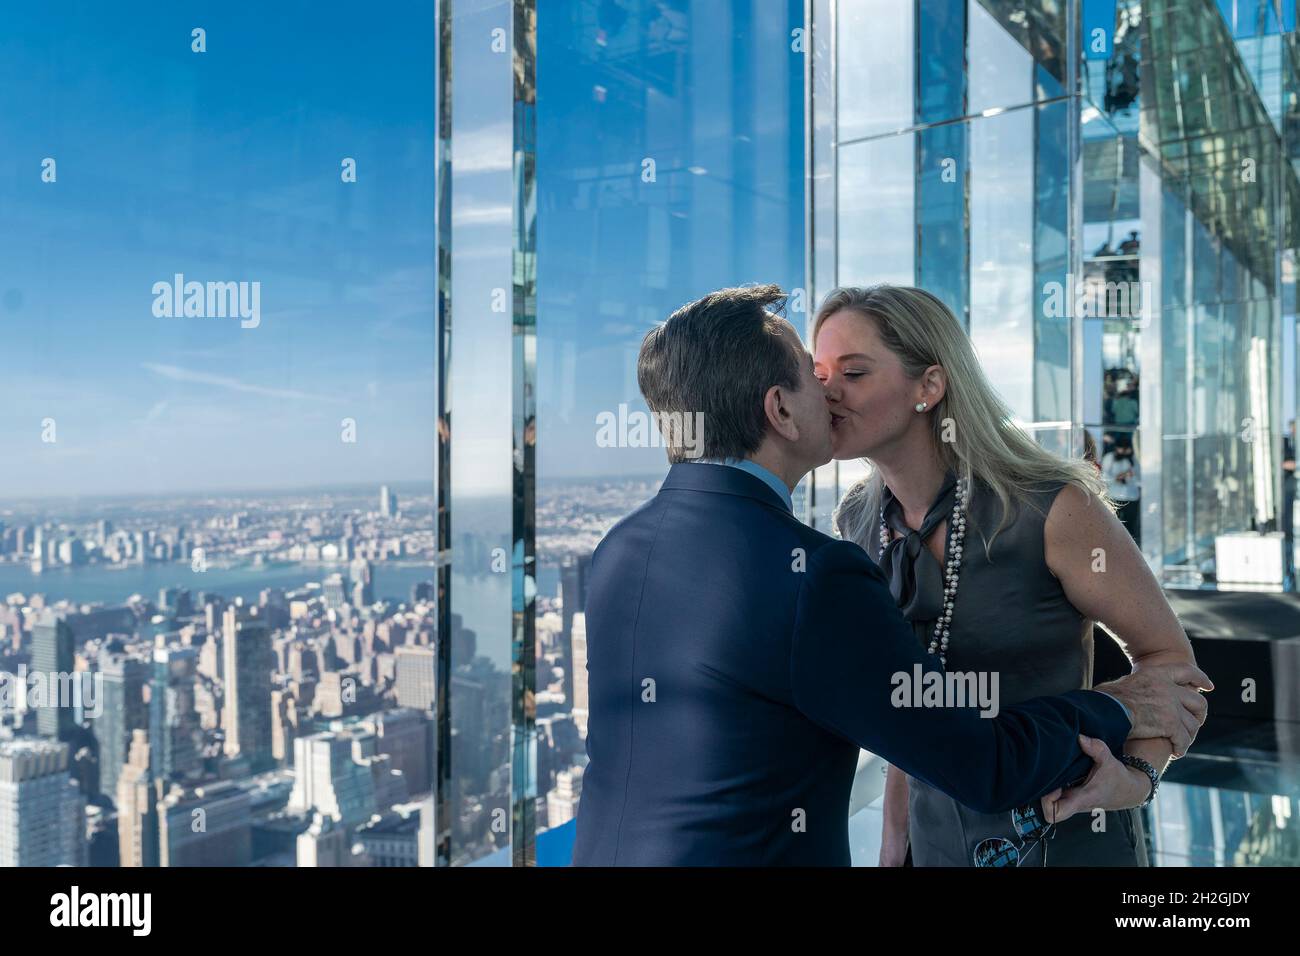 New York, USA. 21st Oct, 2021. Restaurateur Daniel Boulud and wife Katherine Gage kiss on Summit One Vanderbilt observation deck during grand opening in New York on October 21, 2021. Grand opening was attended by many VIP guests including Brooklyn Borough President and Democratic Party nominee for mayor in upcoming election, Lieutenant Governor Brian Benjamin, artist Kenzo Digital, State senator Brad Hoylman, restaurateur Daniel Boulud. (Photo by Lev Radin/Sipa USA) Credit: Sipa USA/Alamy Live News Stock Photo